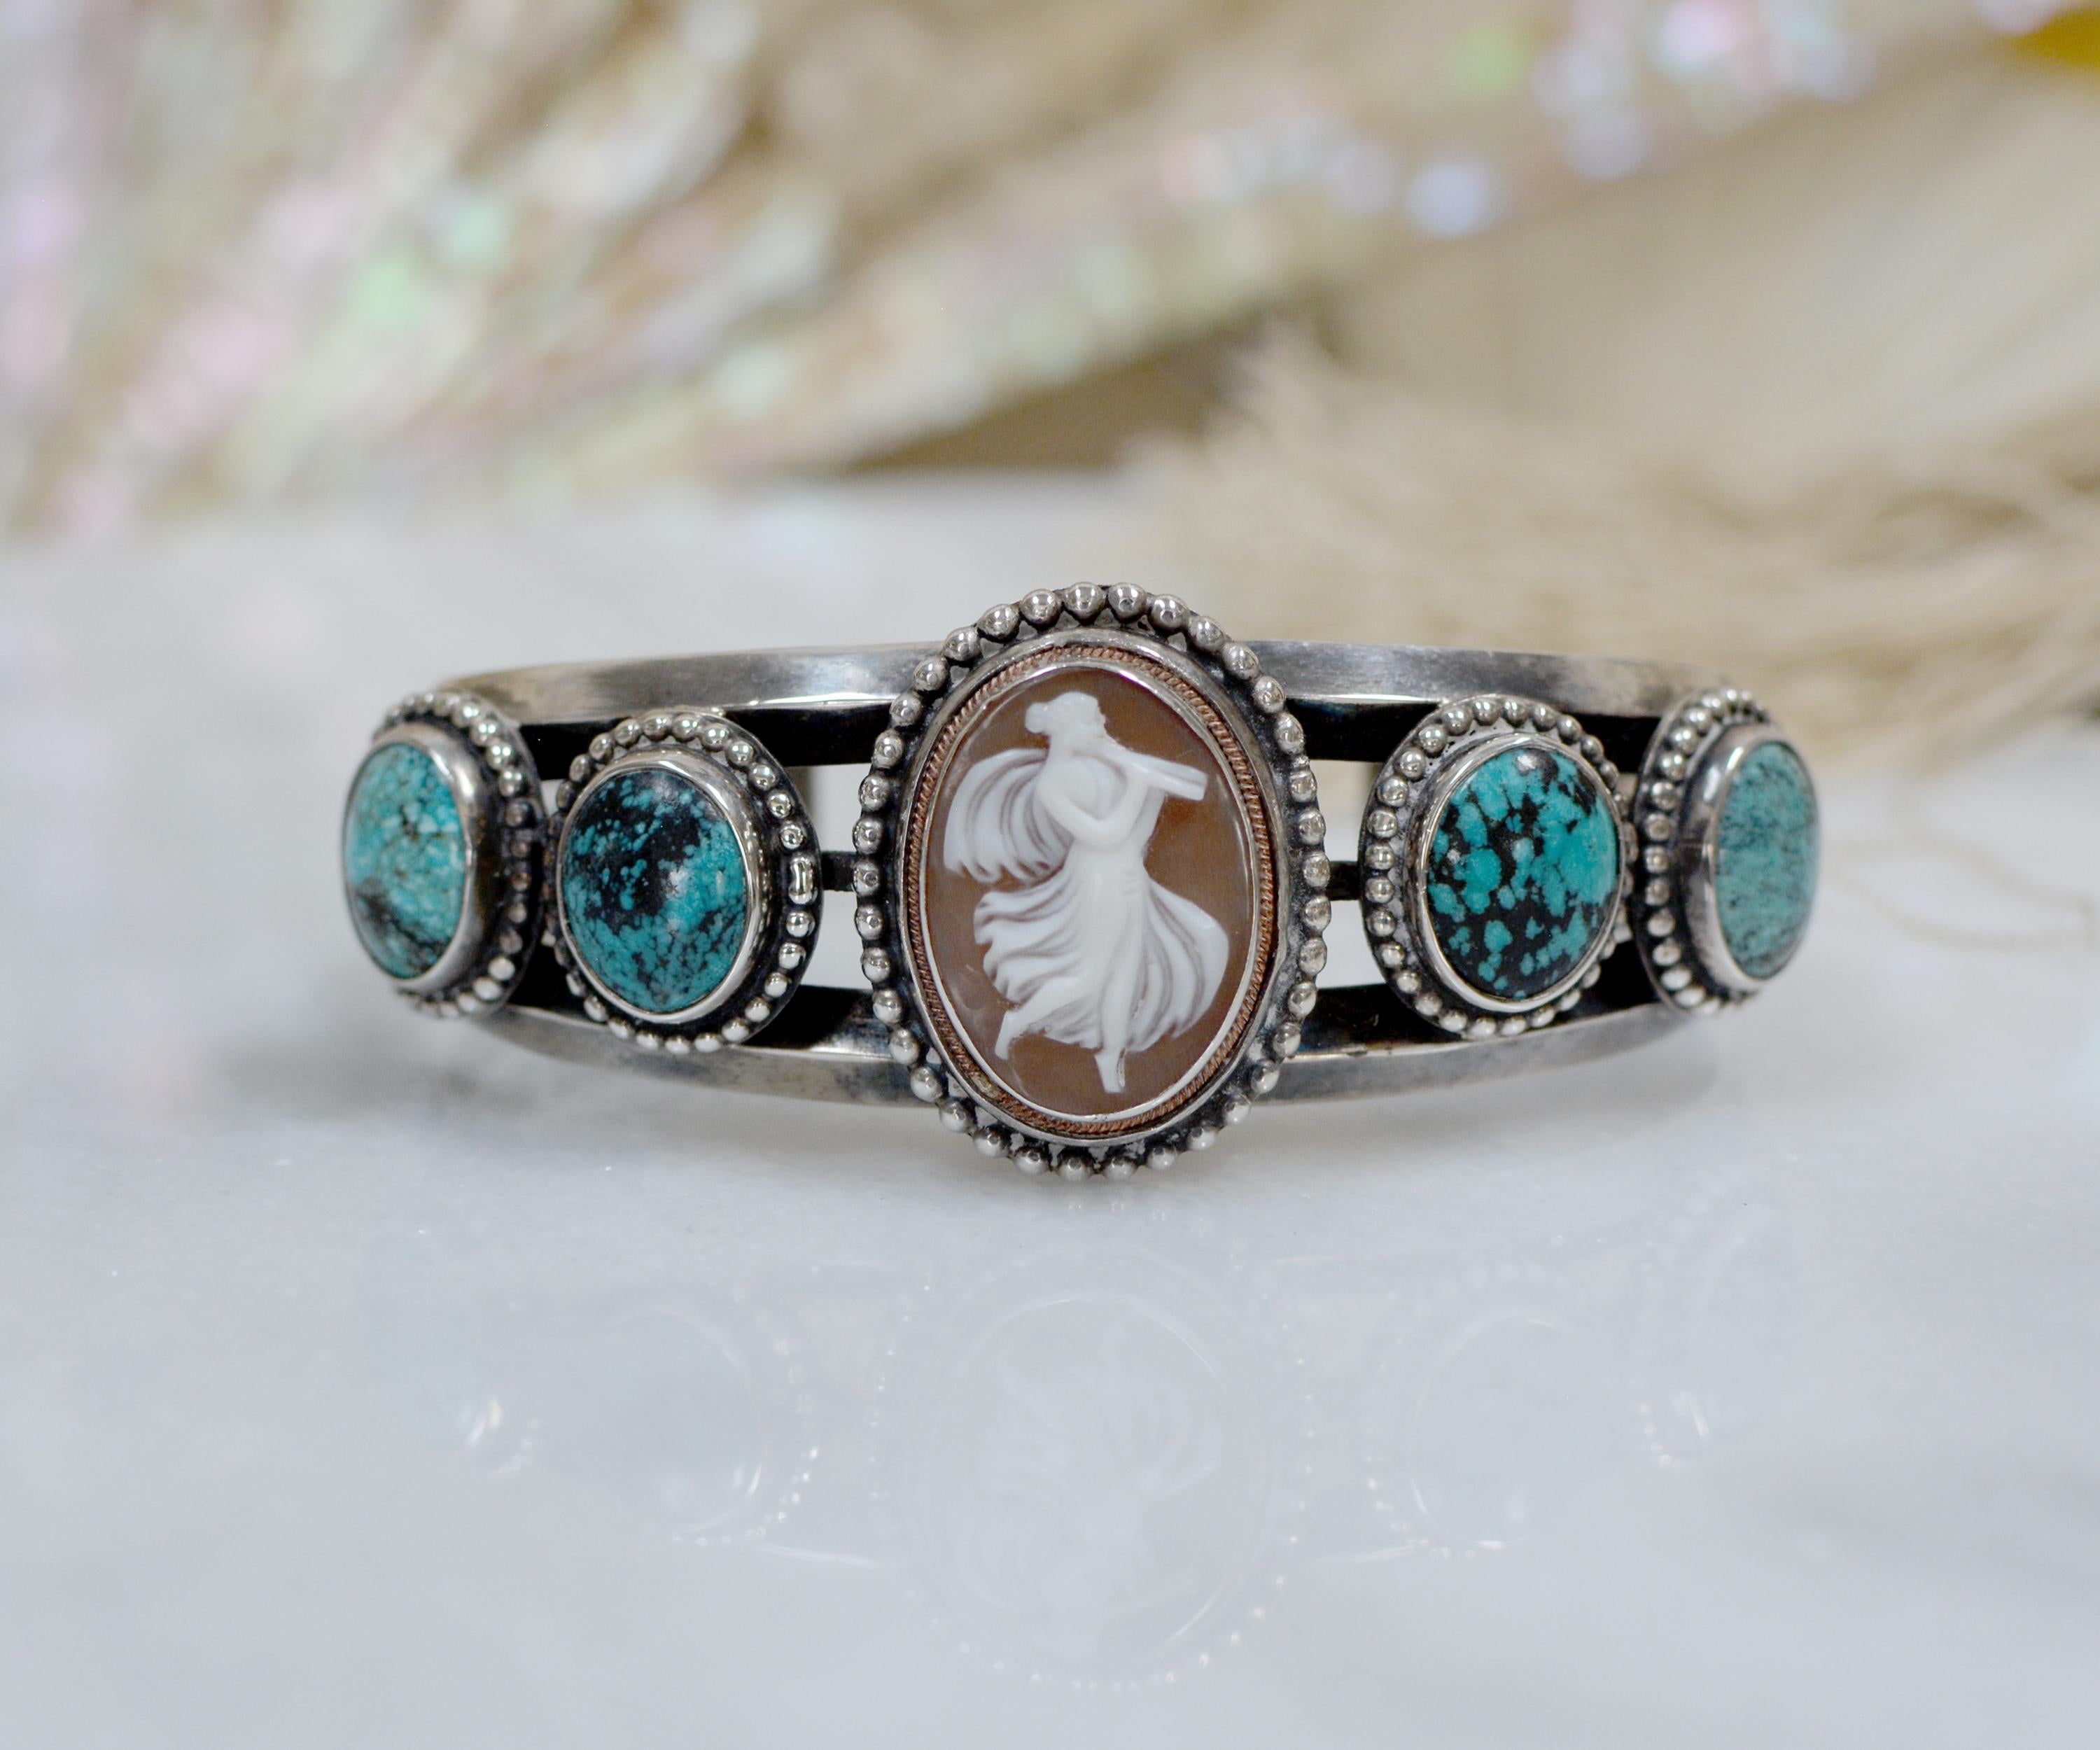 Women's or Men's Jill Garber Pair Victorian Goddess Cameo Modern Cuff Bracelets with Turquoise